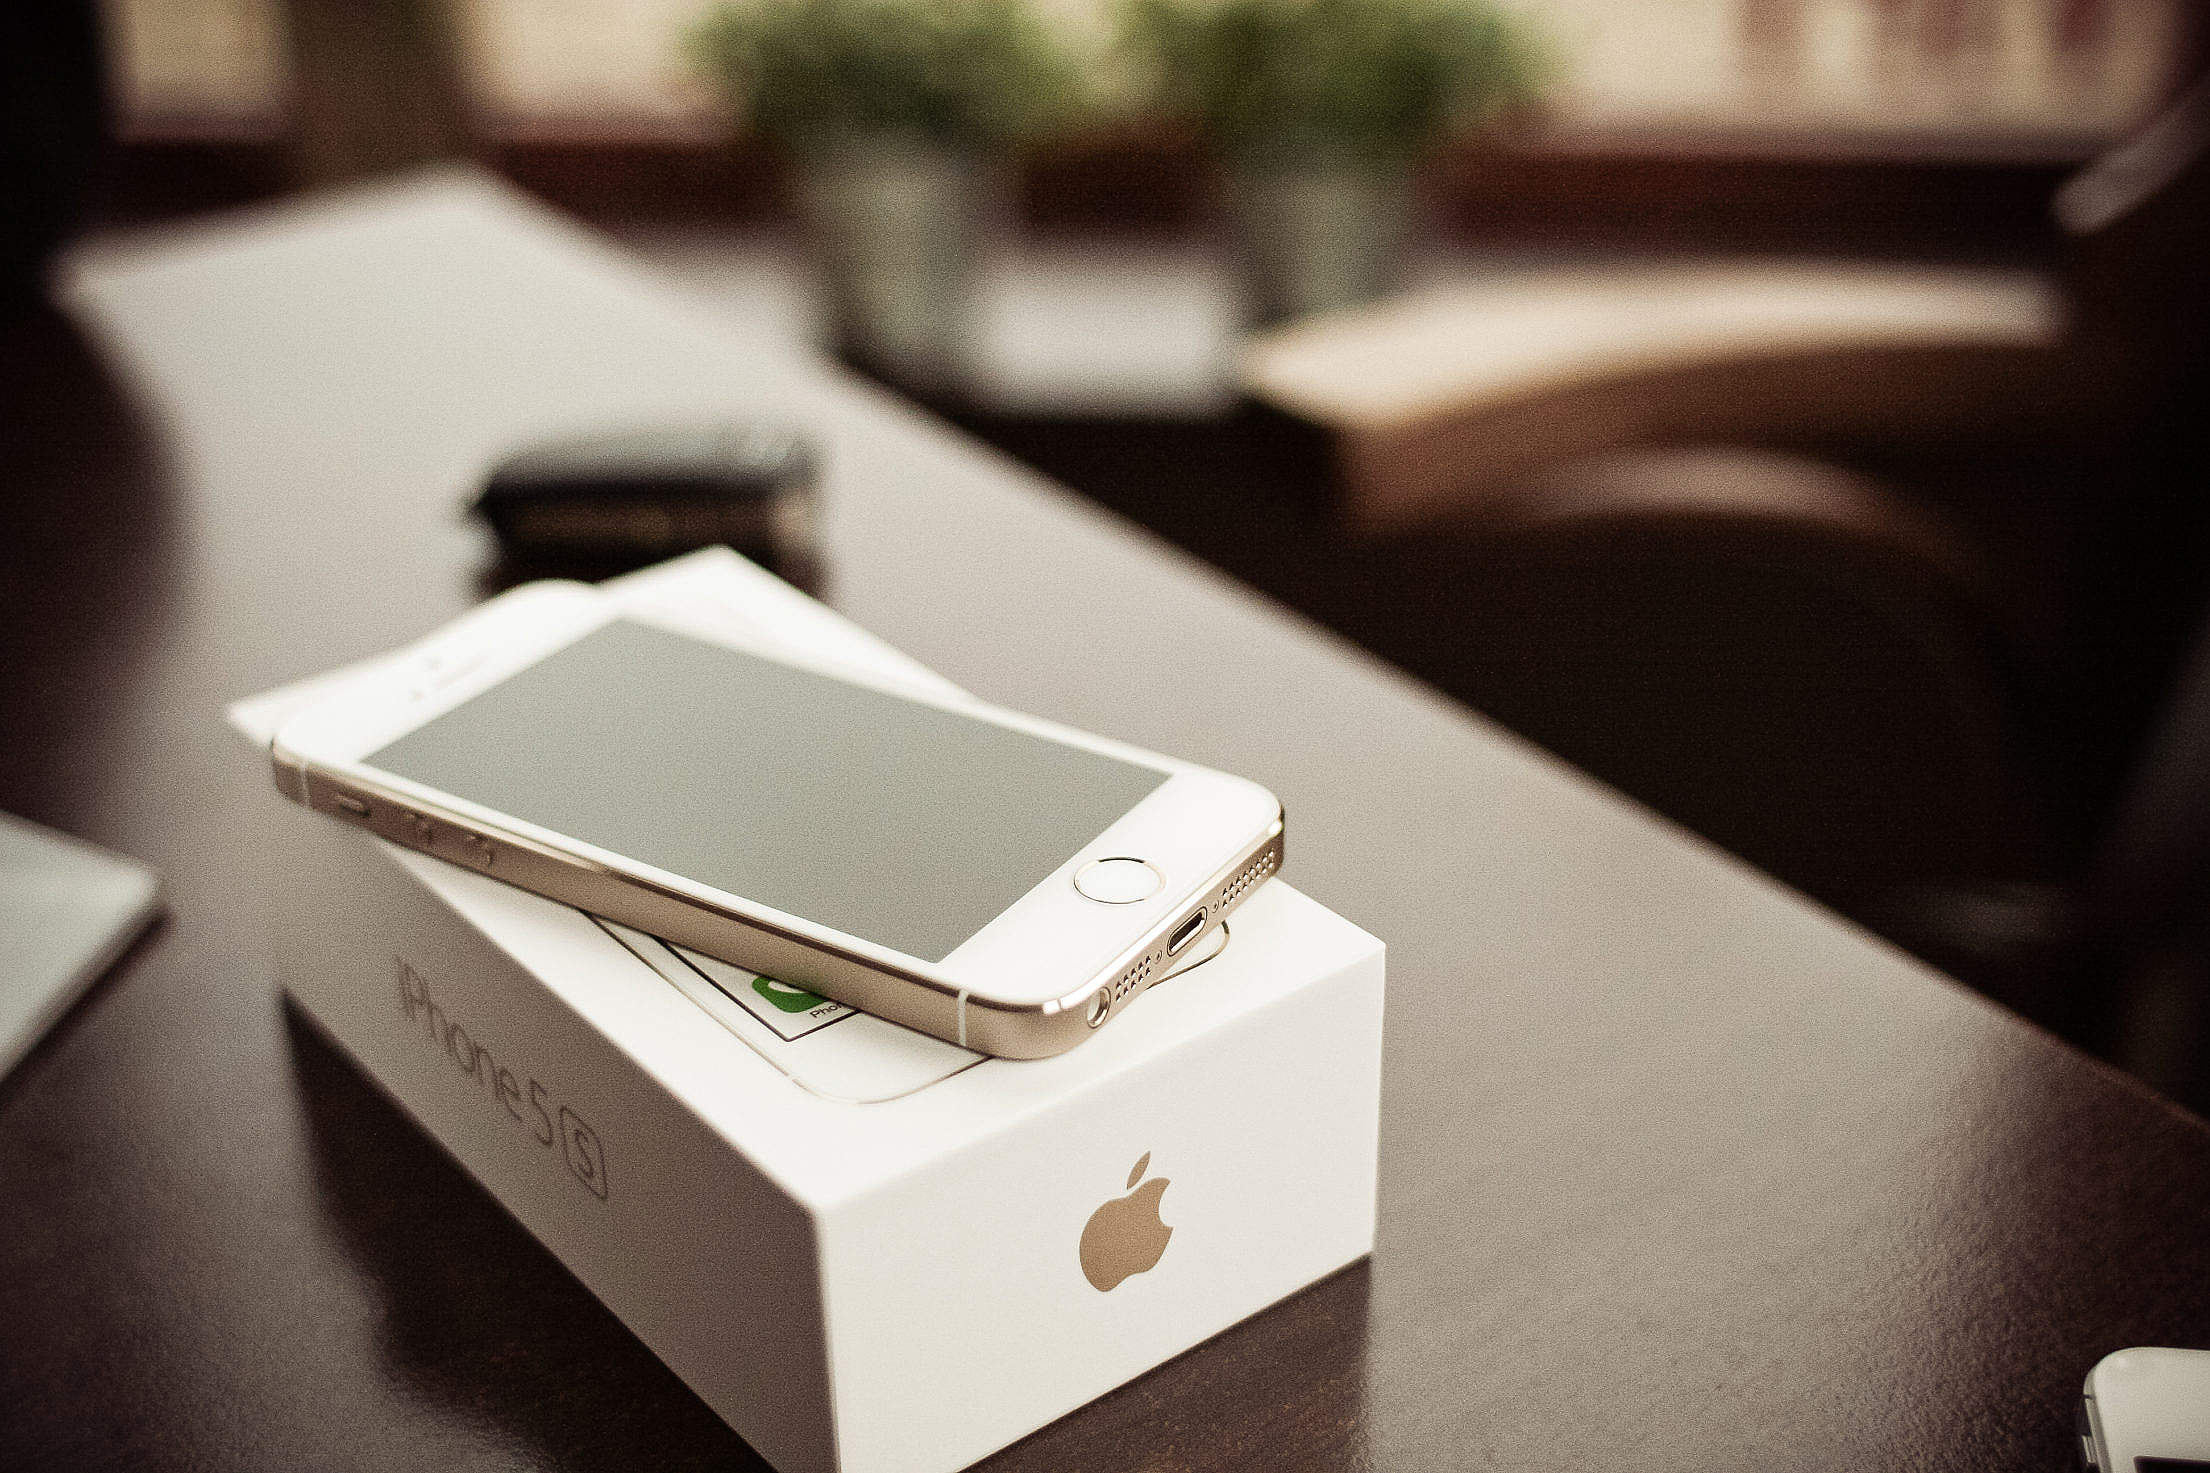 Download Iphone 5s Gold With A Box Free Stock Photo Iphone 5s Images Download 2210x1473 Wallpaper Teahub Io